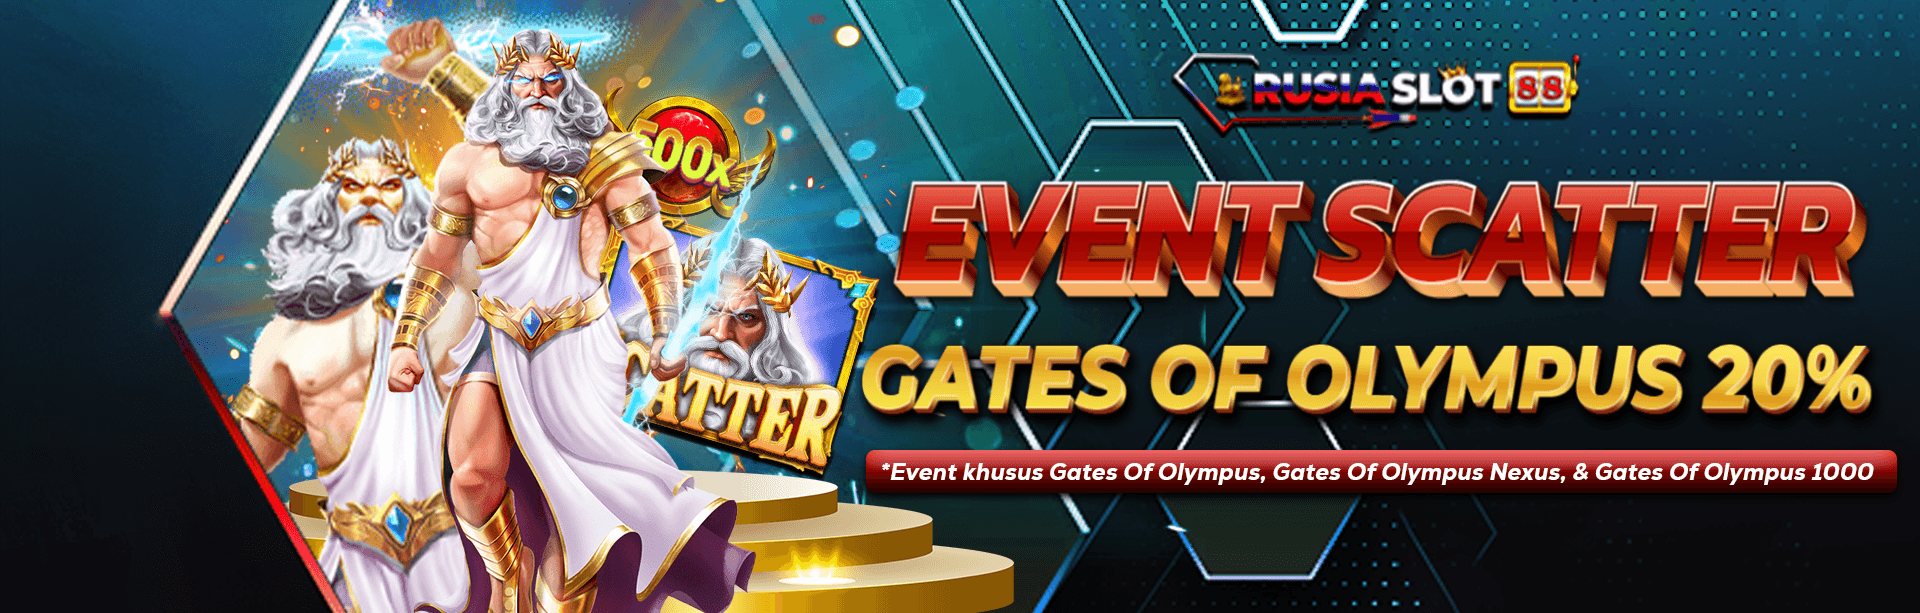 EVENT SCATTER GATES OF OLYMPUS